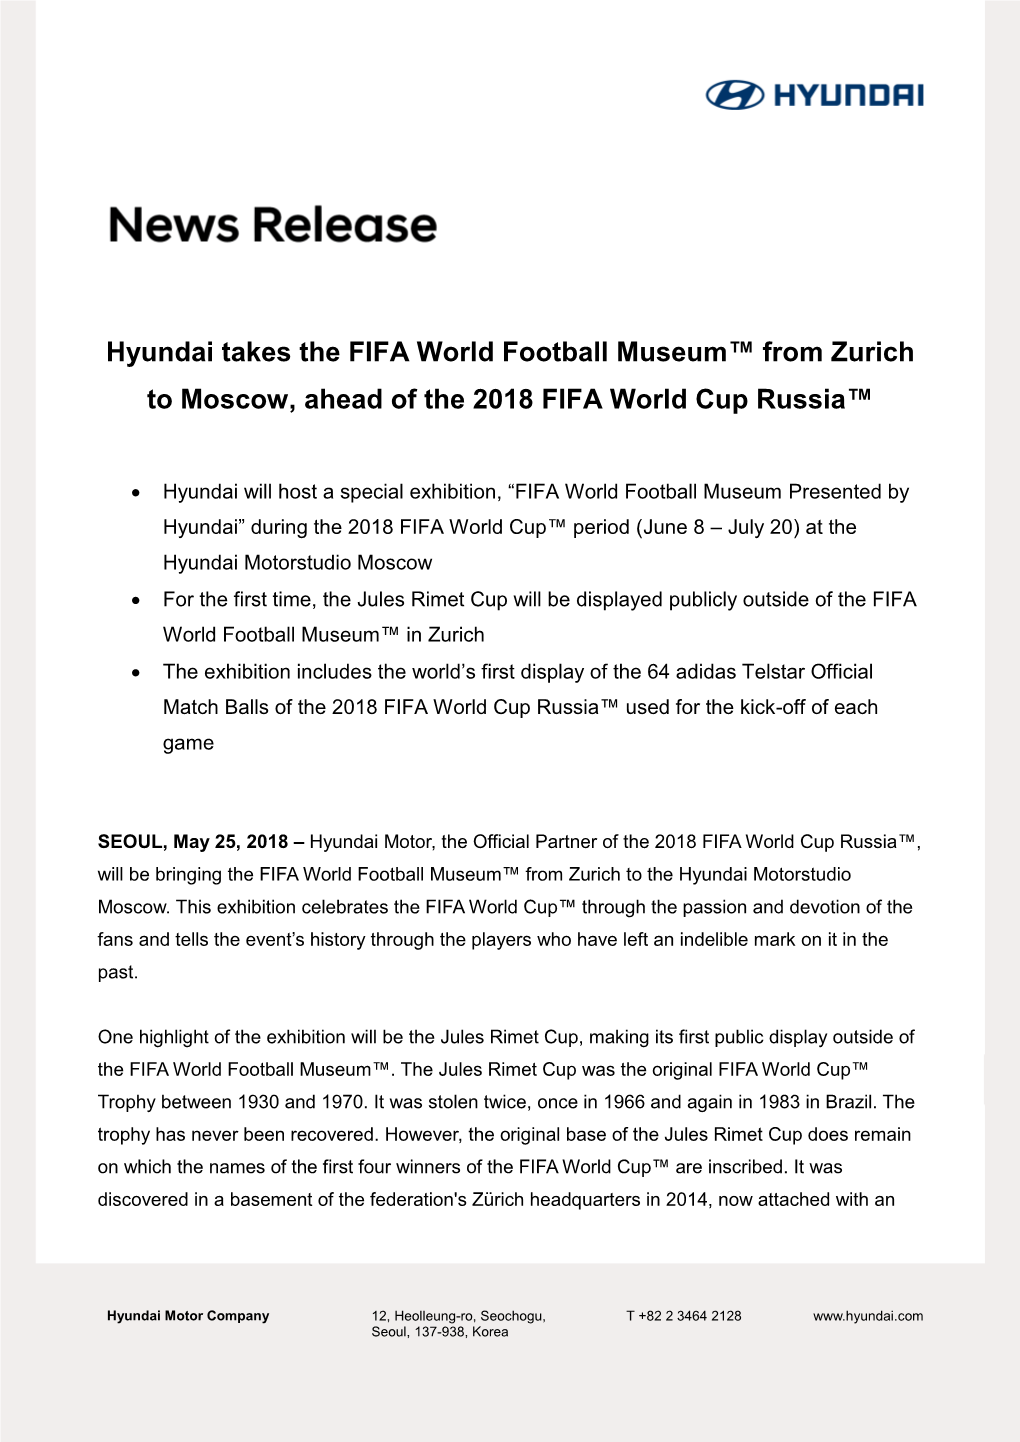 Hyundai Takes the FIFA World Football Museum™ from Zurich to Moscow, Ahead of the 2018 FIFA World Cup Russia™